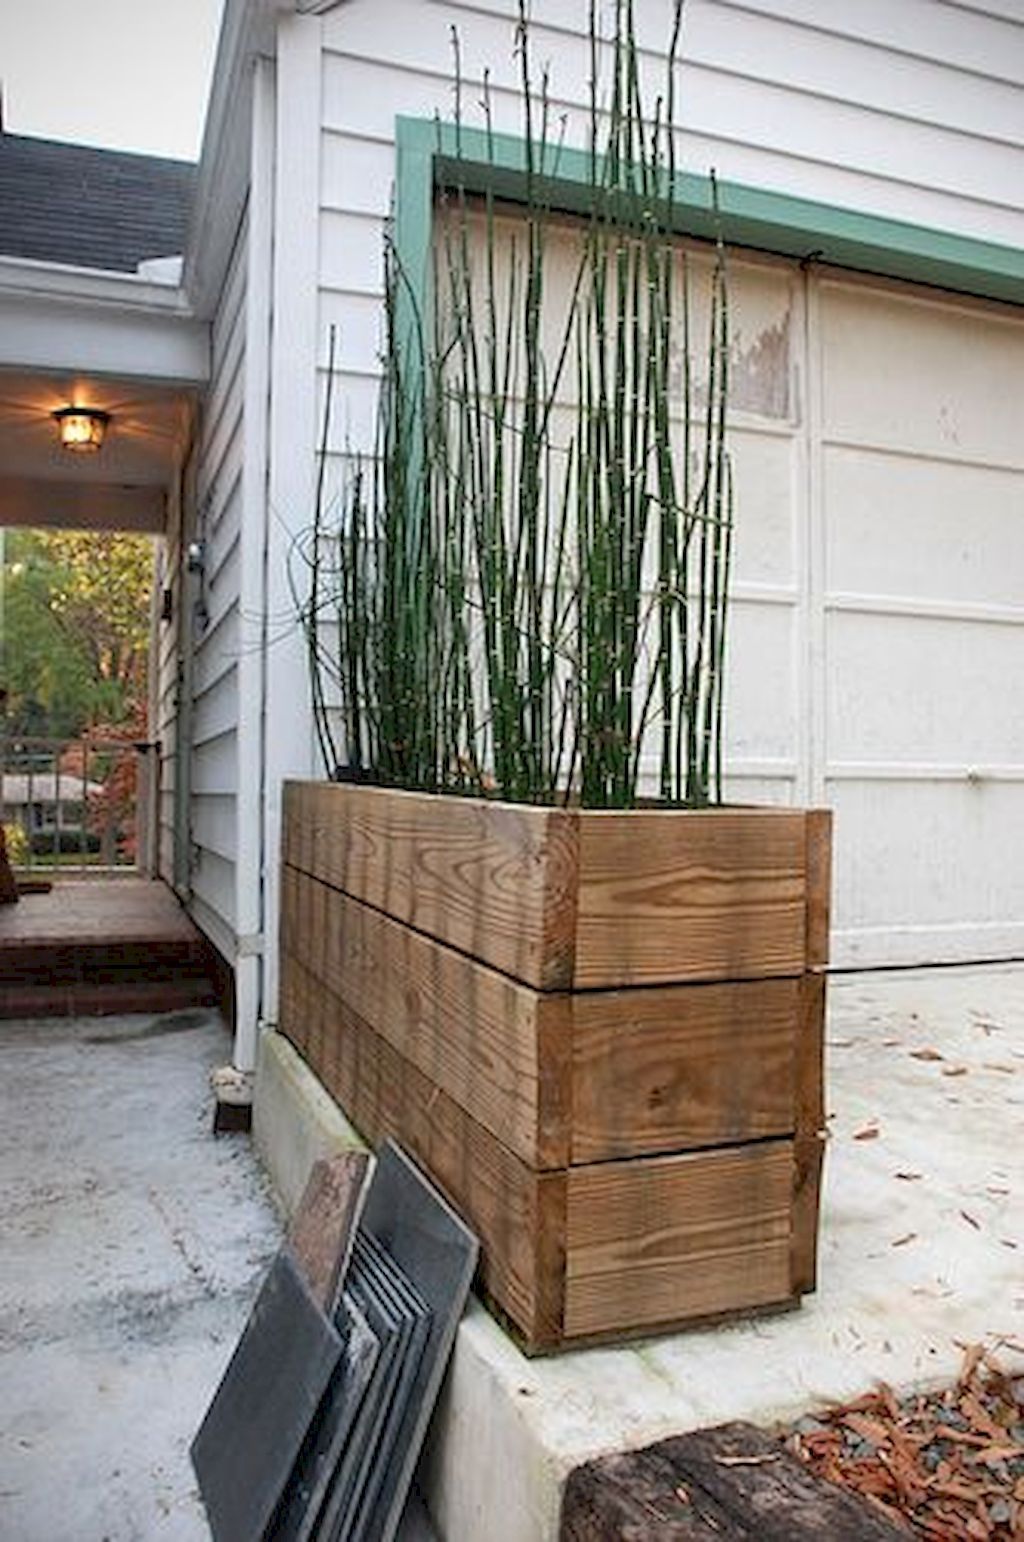 Creative Homemade Planter Boxes from Pallets – Simple DIY Project -   19 diy projects Outdoor planter boxes ideas